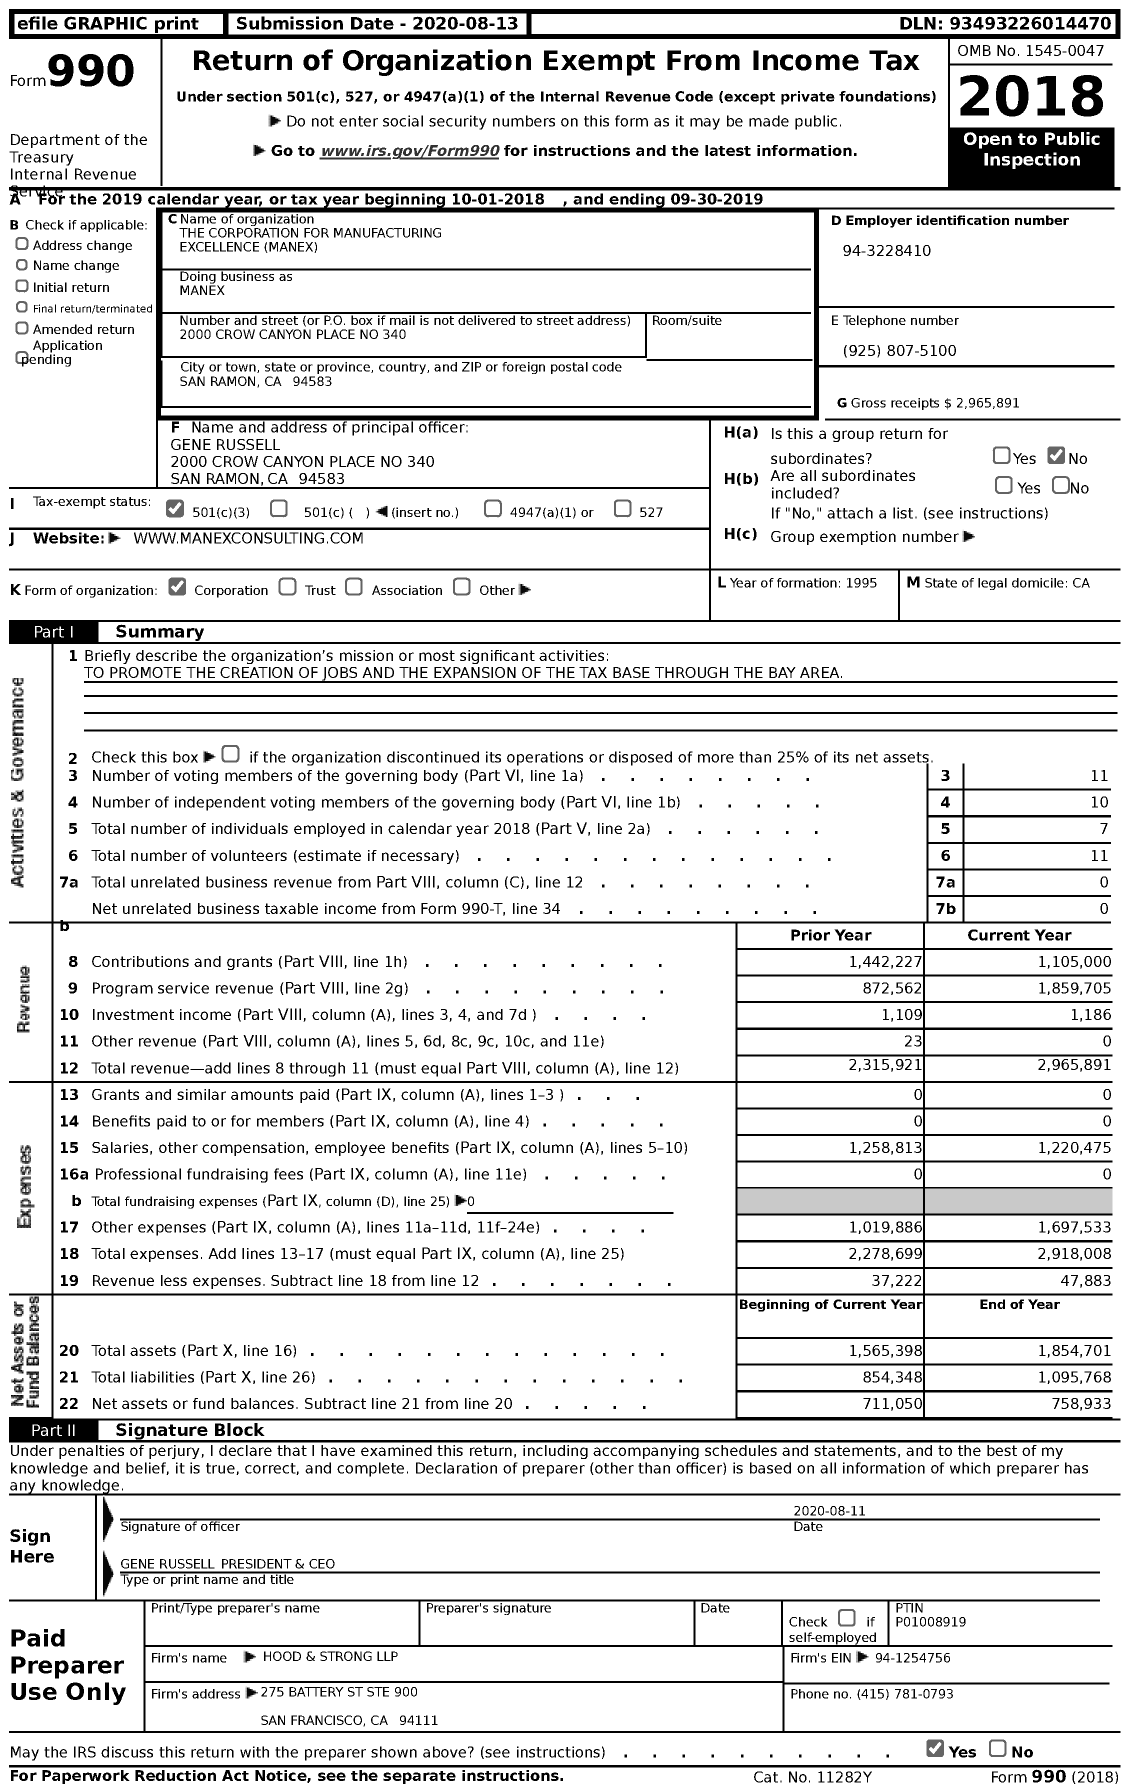 Image of first page of 2018 Form 990 for The Corporation for Manufacturing Excellence Manex (Manex)